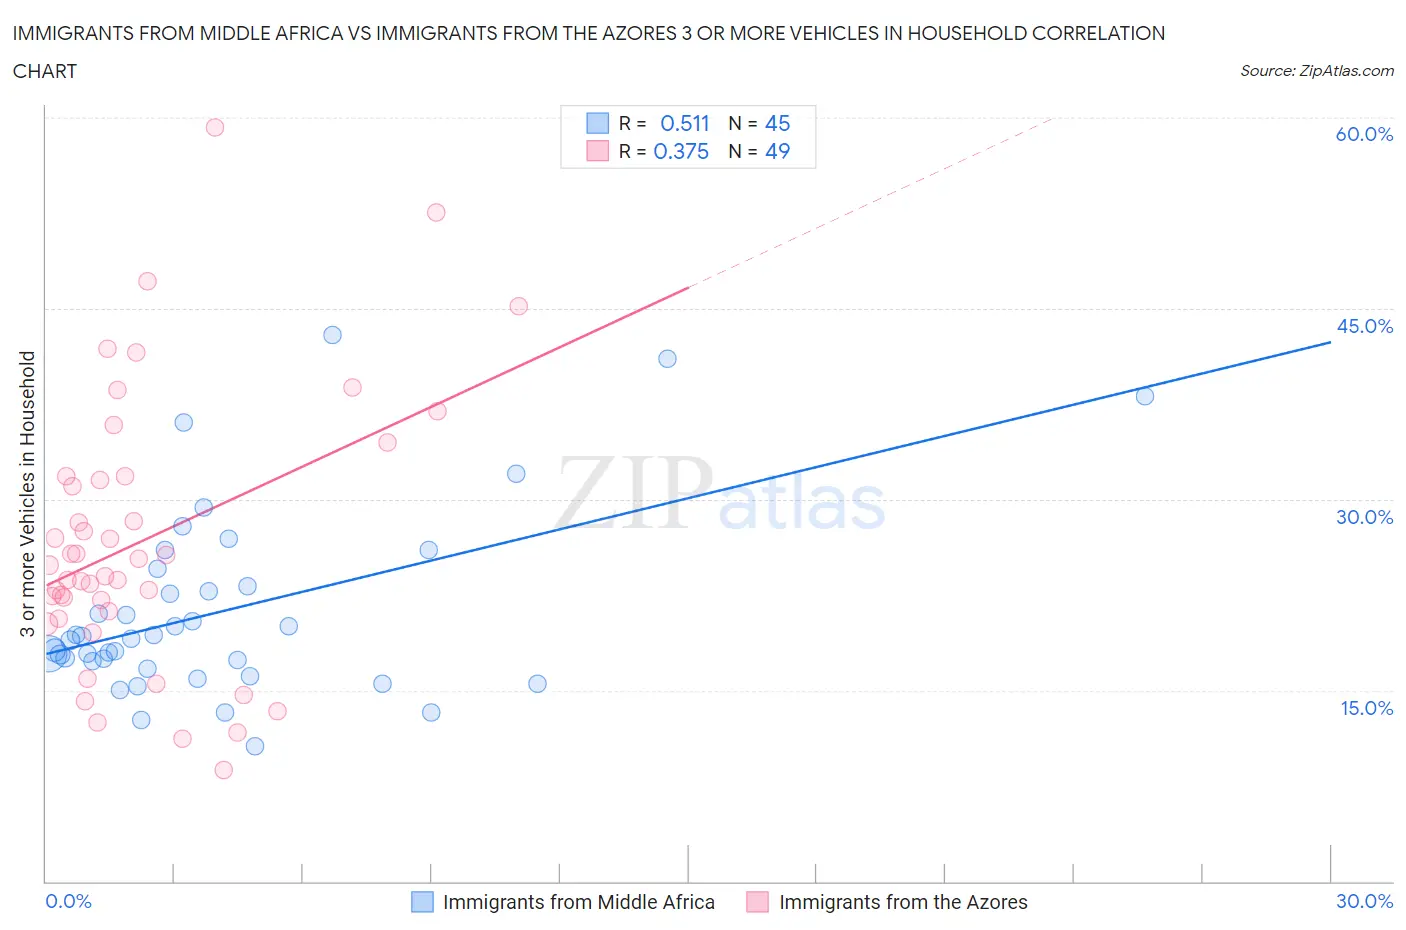 Immigrants from Middle Africa vs Immigrants from the Azores 3 or more Vehicles in Household